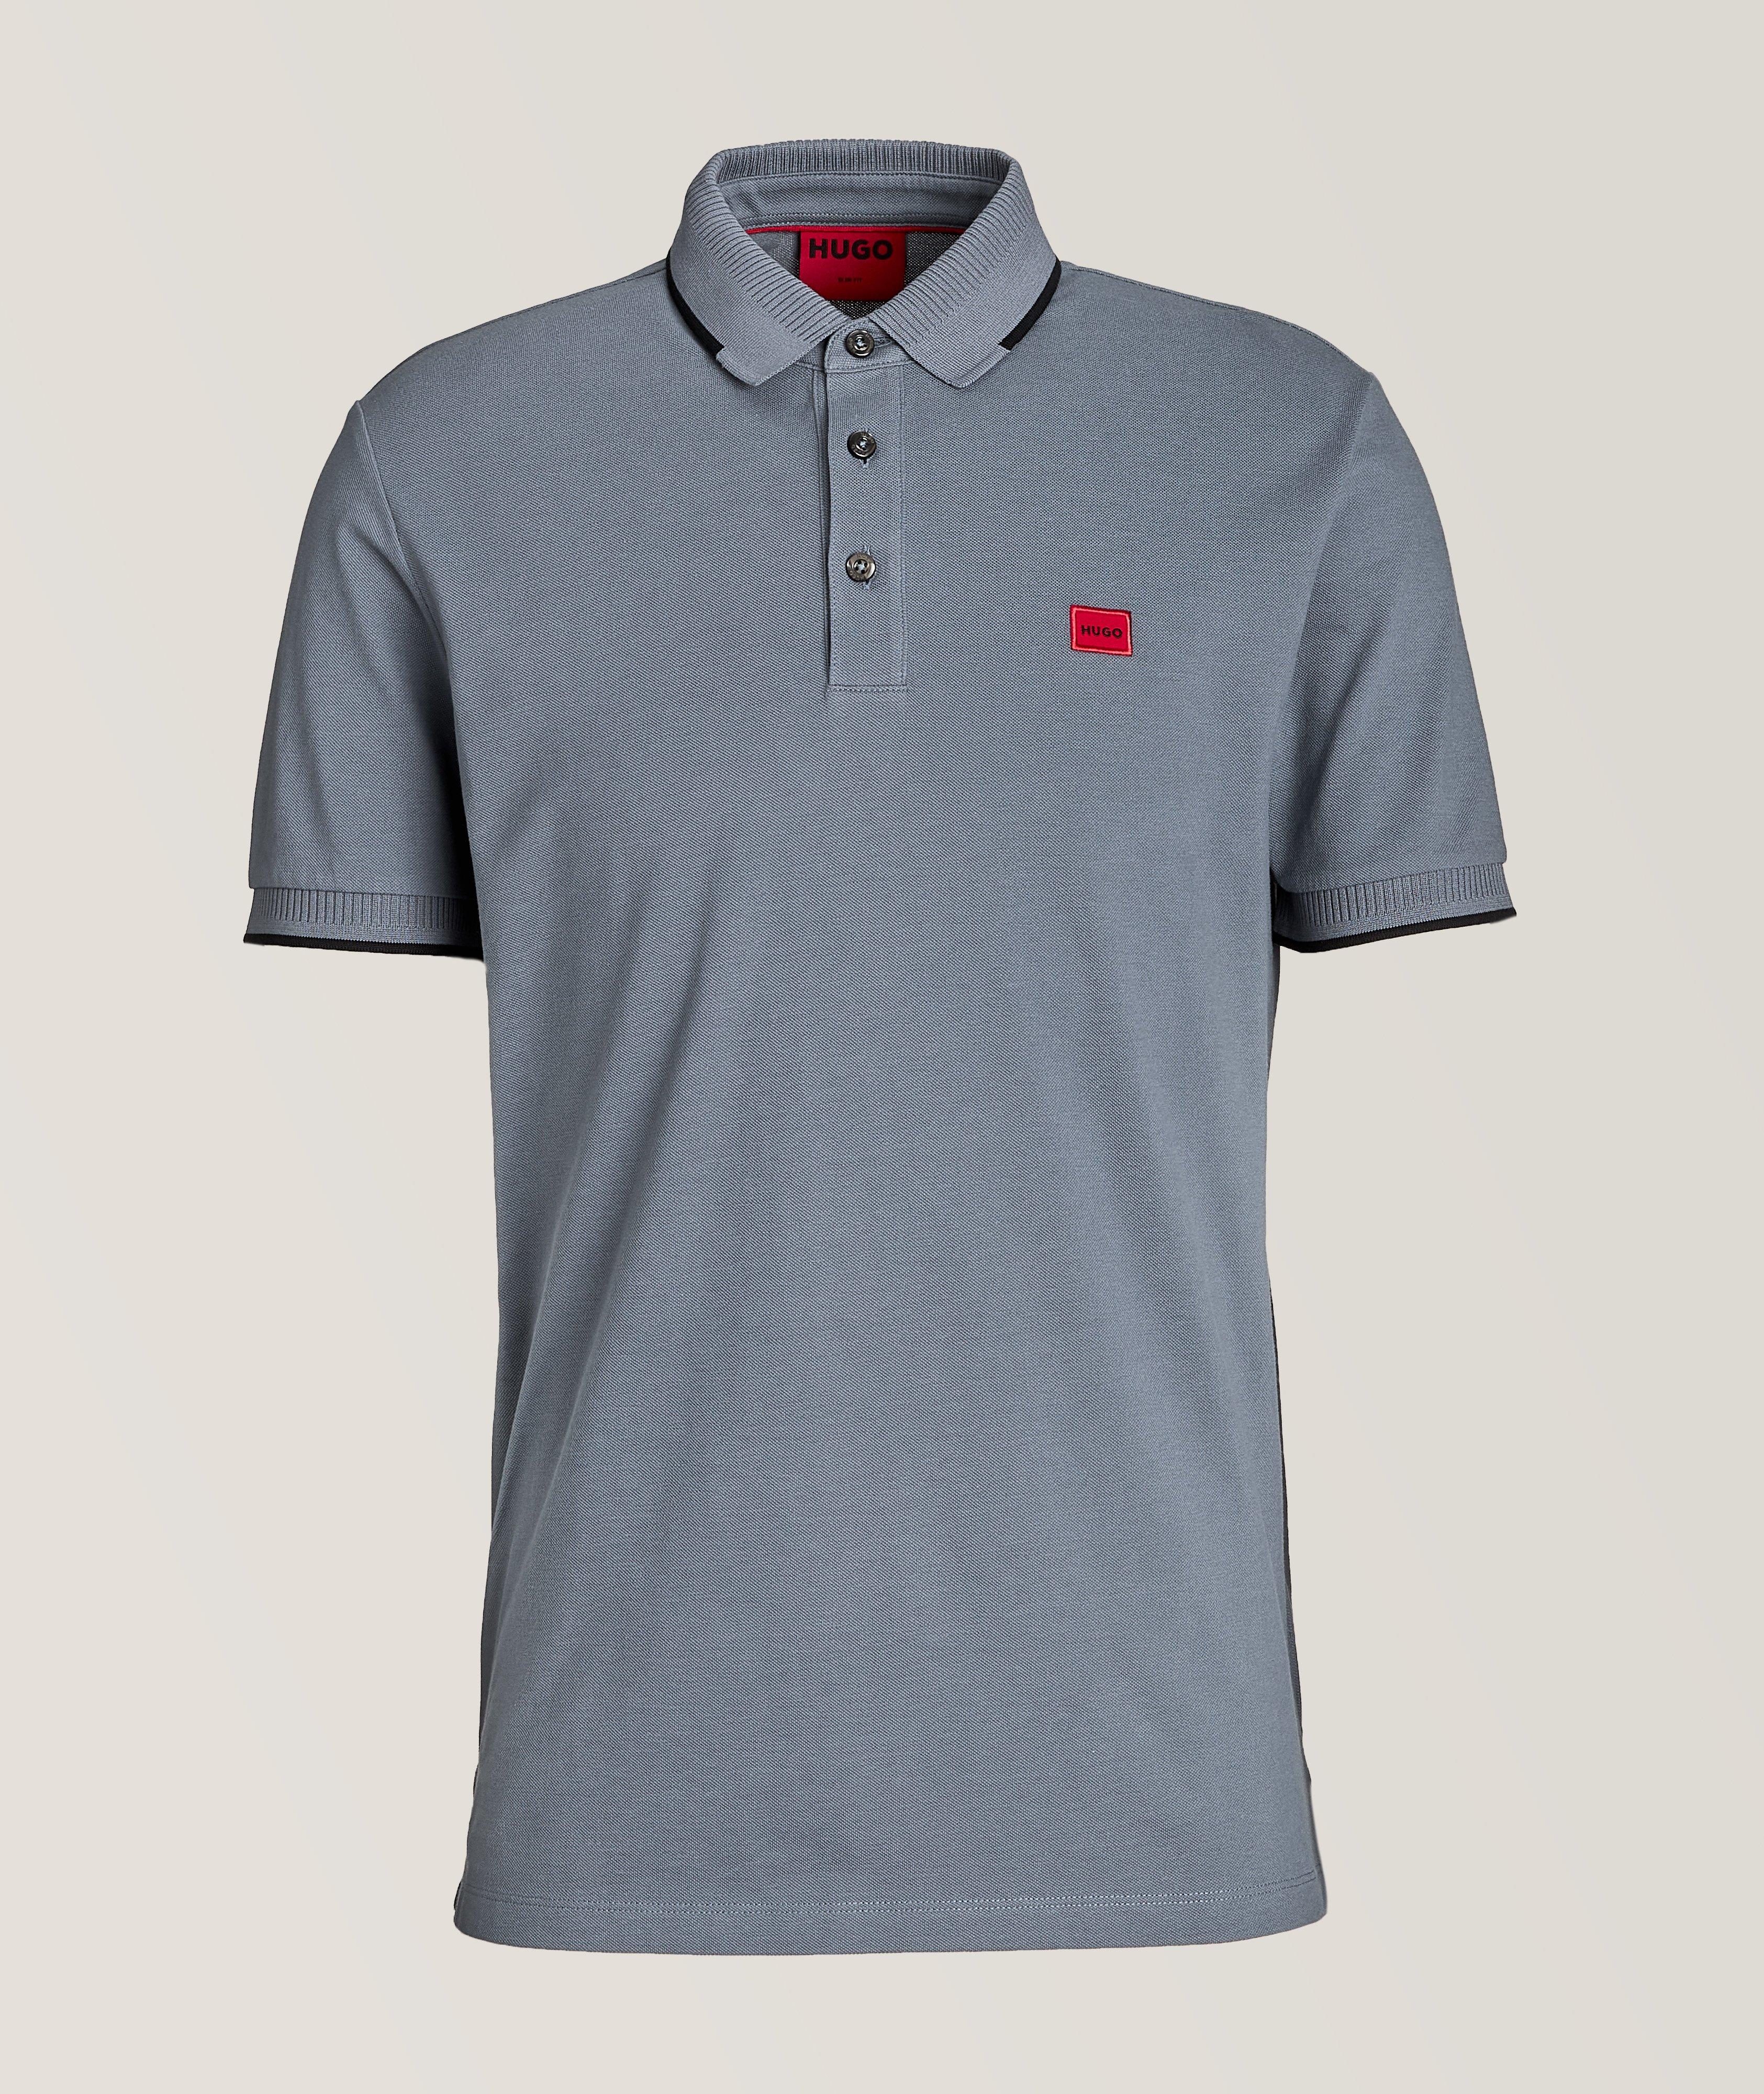 Sustainable Contrast Tipping Cotton Piqué Polo image 0